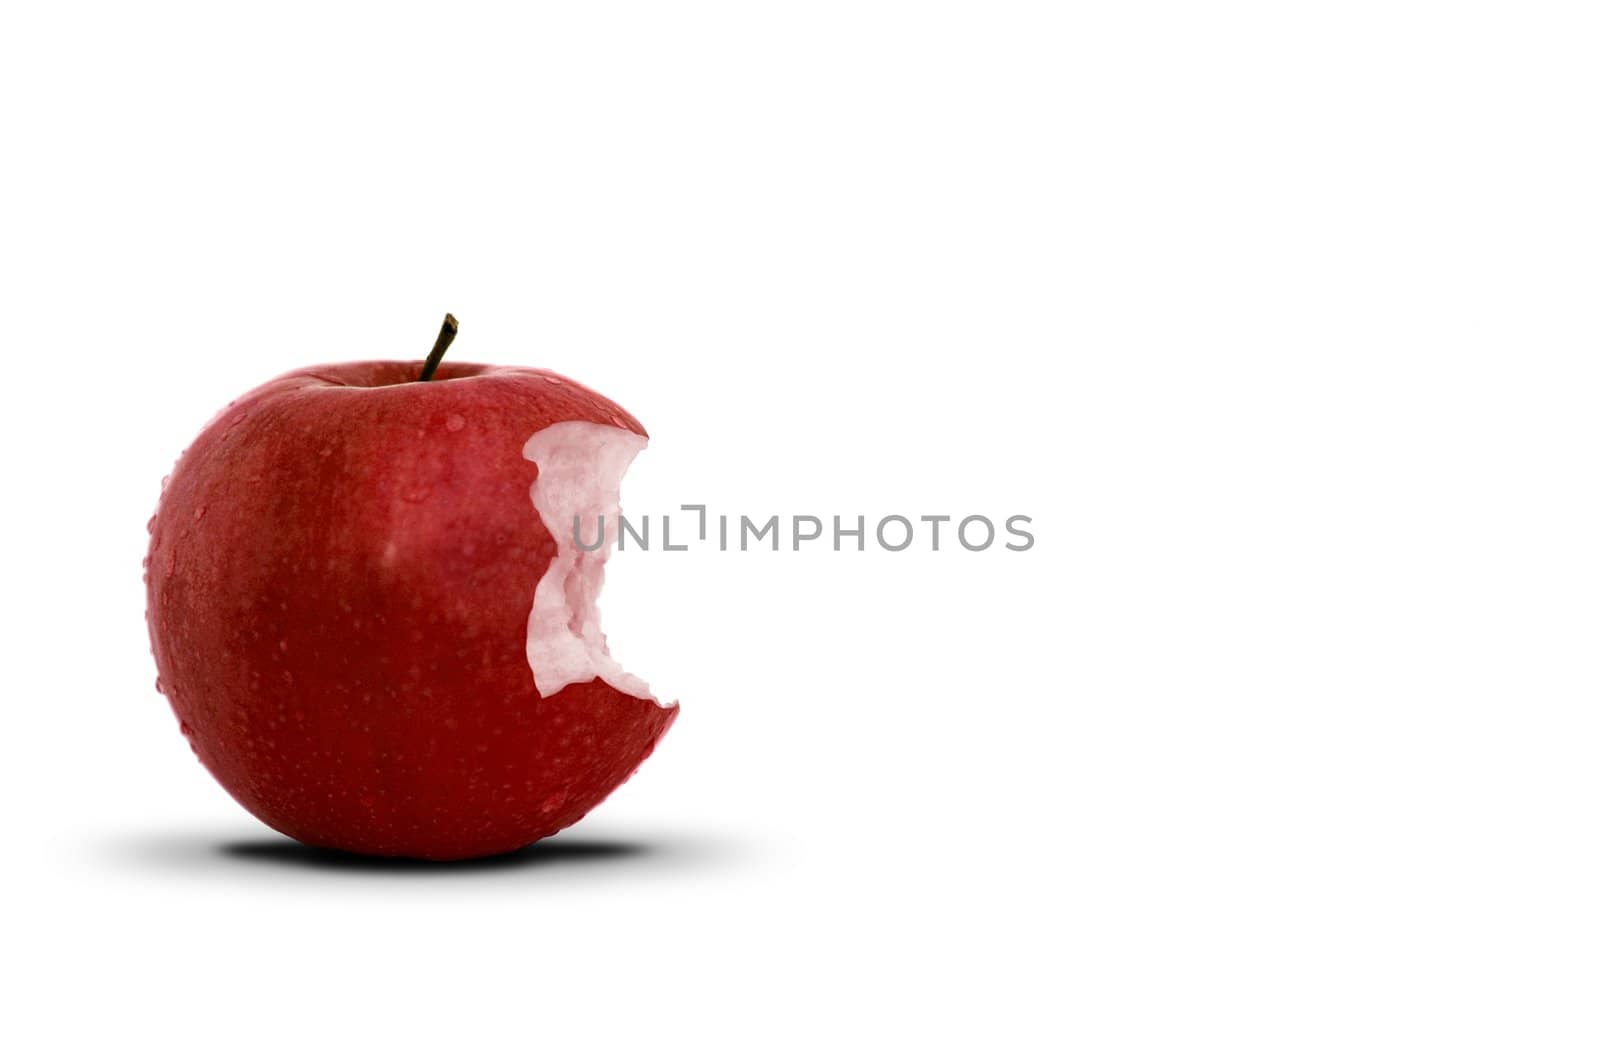 Image of red apple with a bite